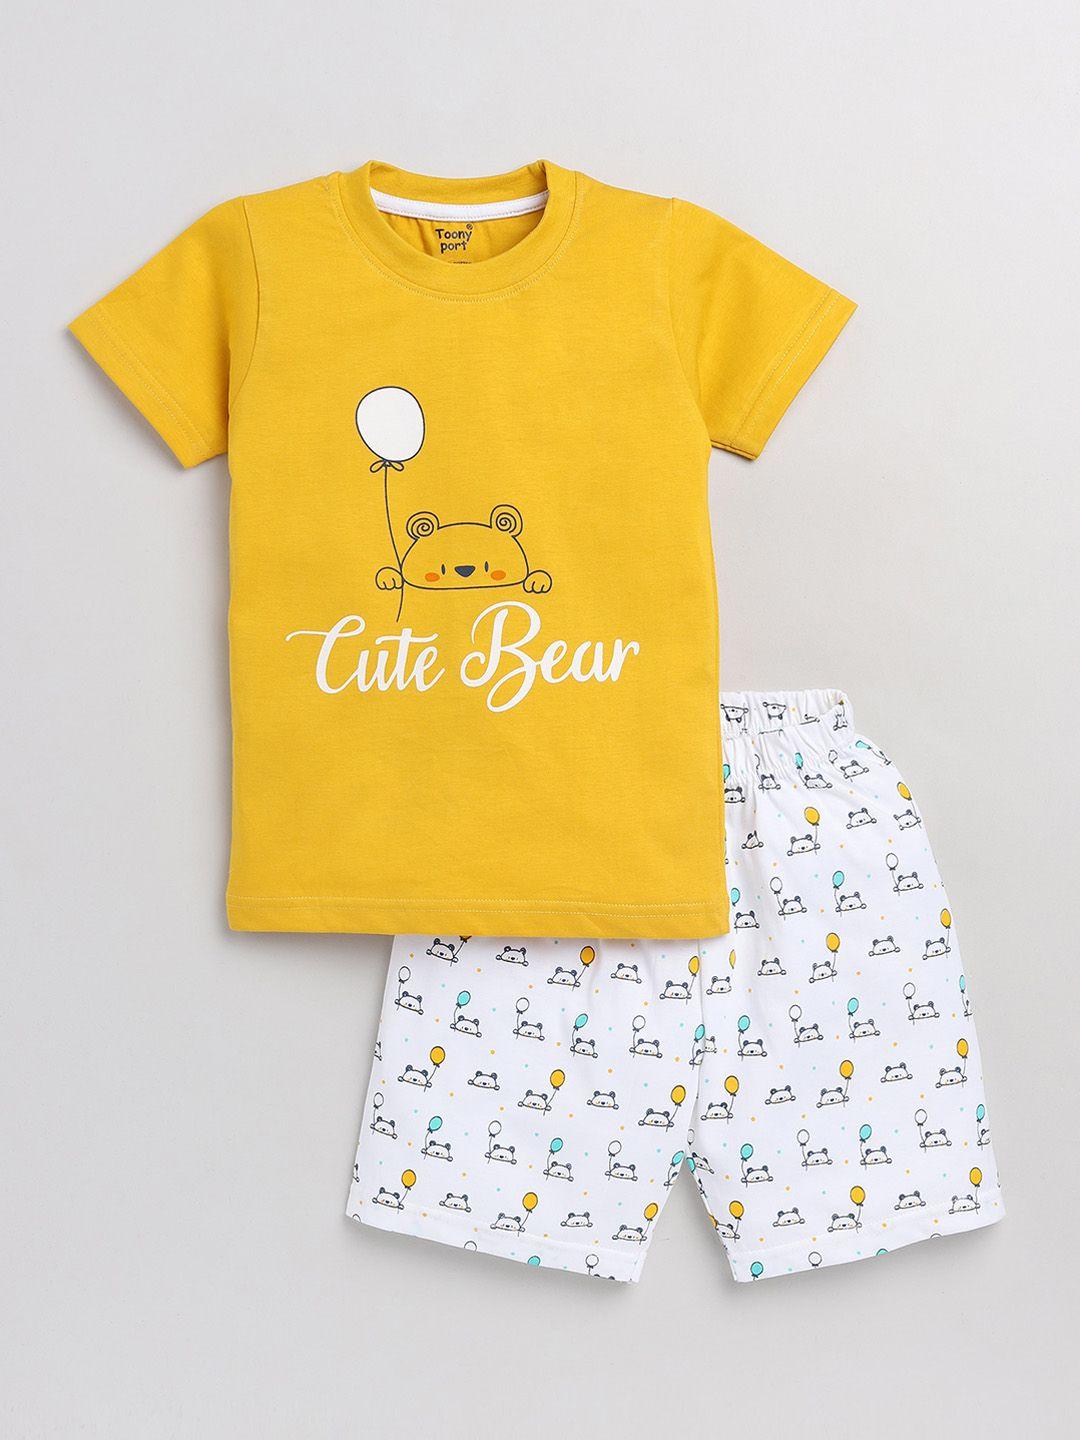 toonyport boys yellow & white pure cotton printed t-shirt with shorts